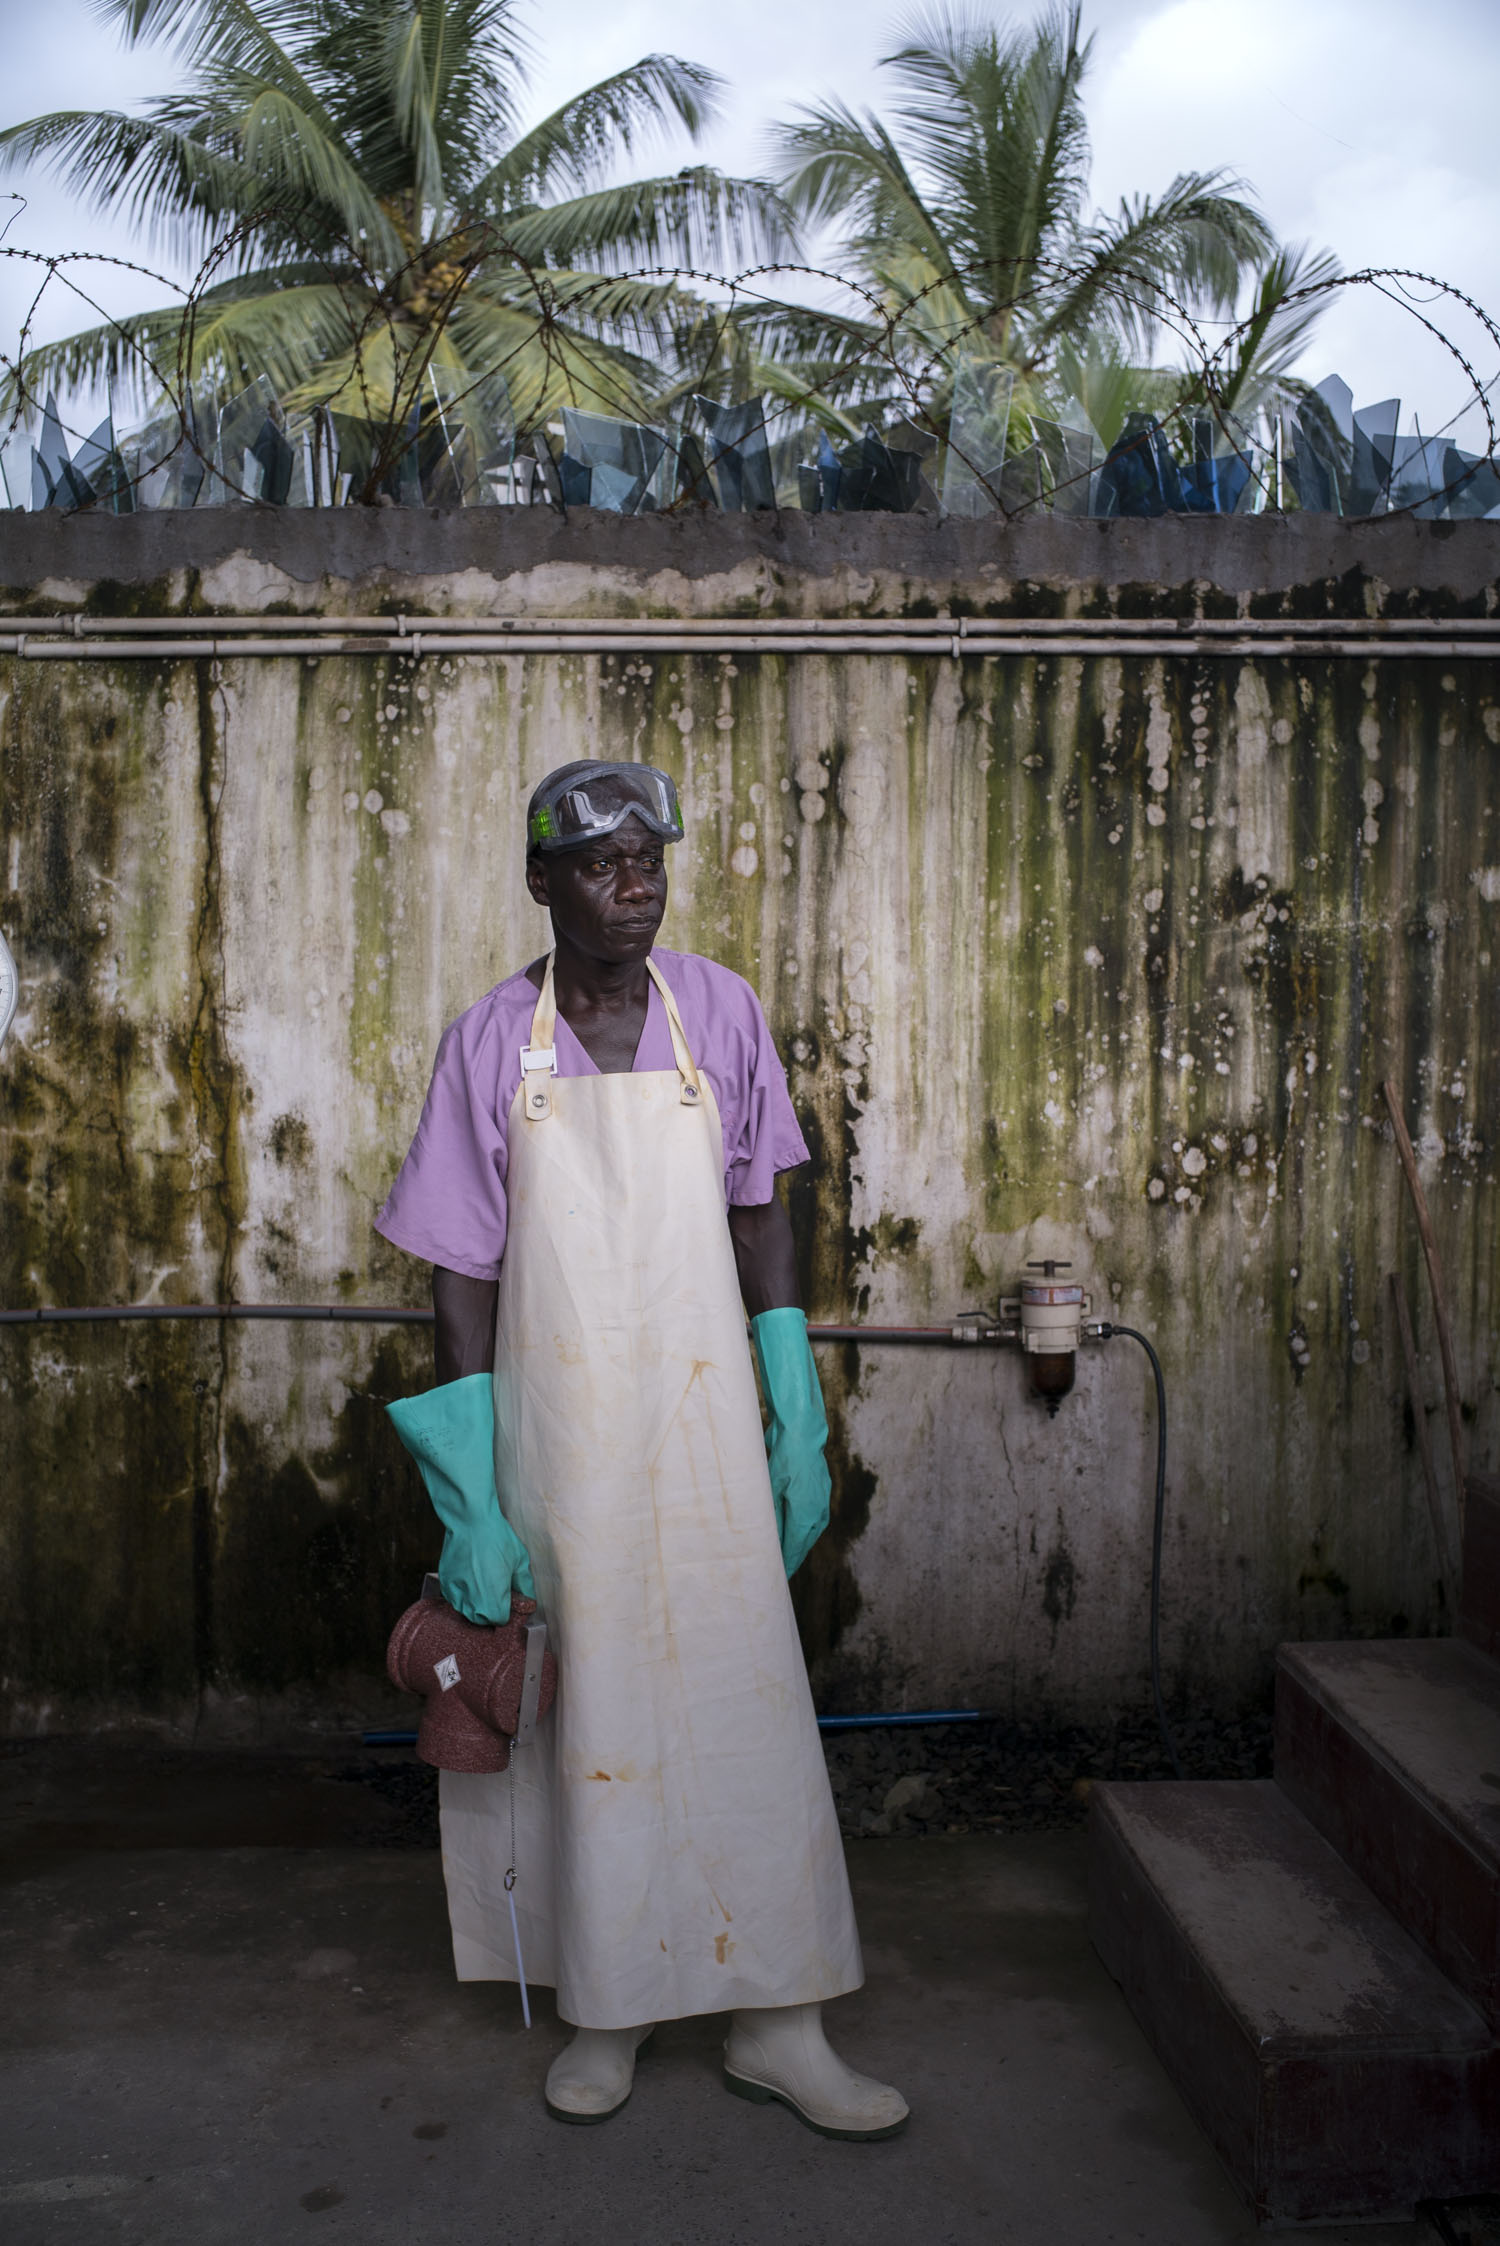  Alfred Walker, 52, Water and Sanitation Supervisor of an MSF hospital in Monrovia, Liberia, stands by the stairs leading to the incinerator, which is used for safe disposal of medical waste. In the aftermath of the the ebola epidemic of 2014/15 that